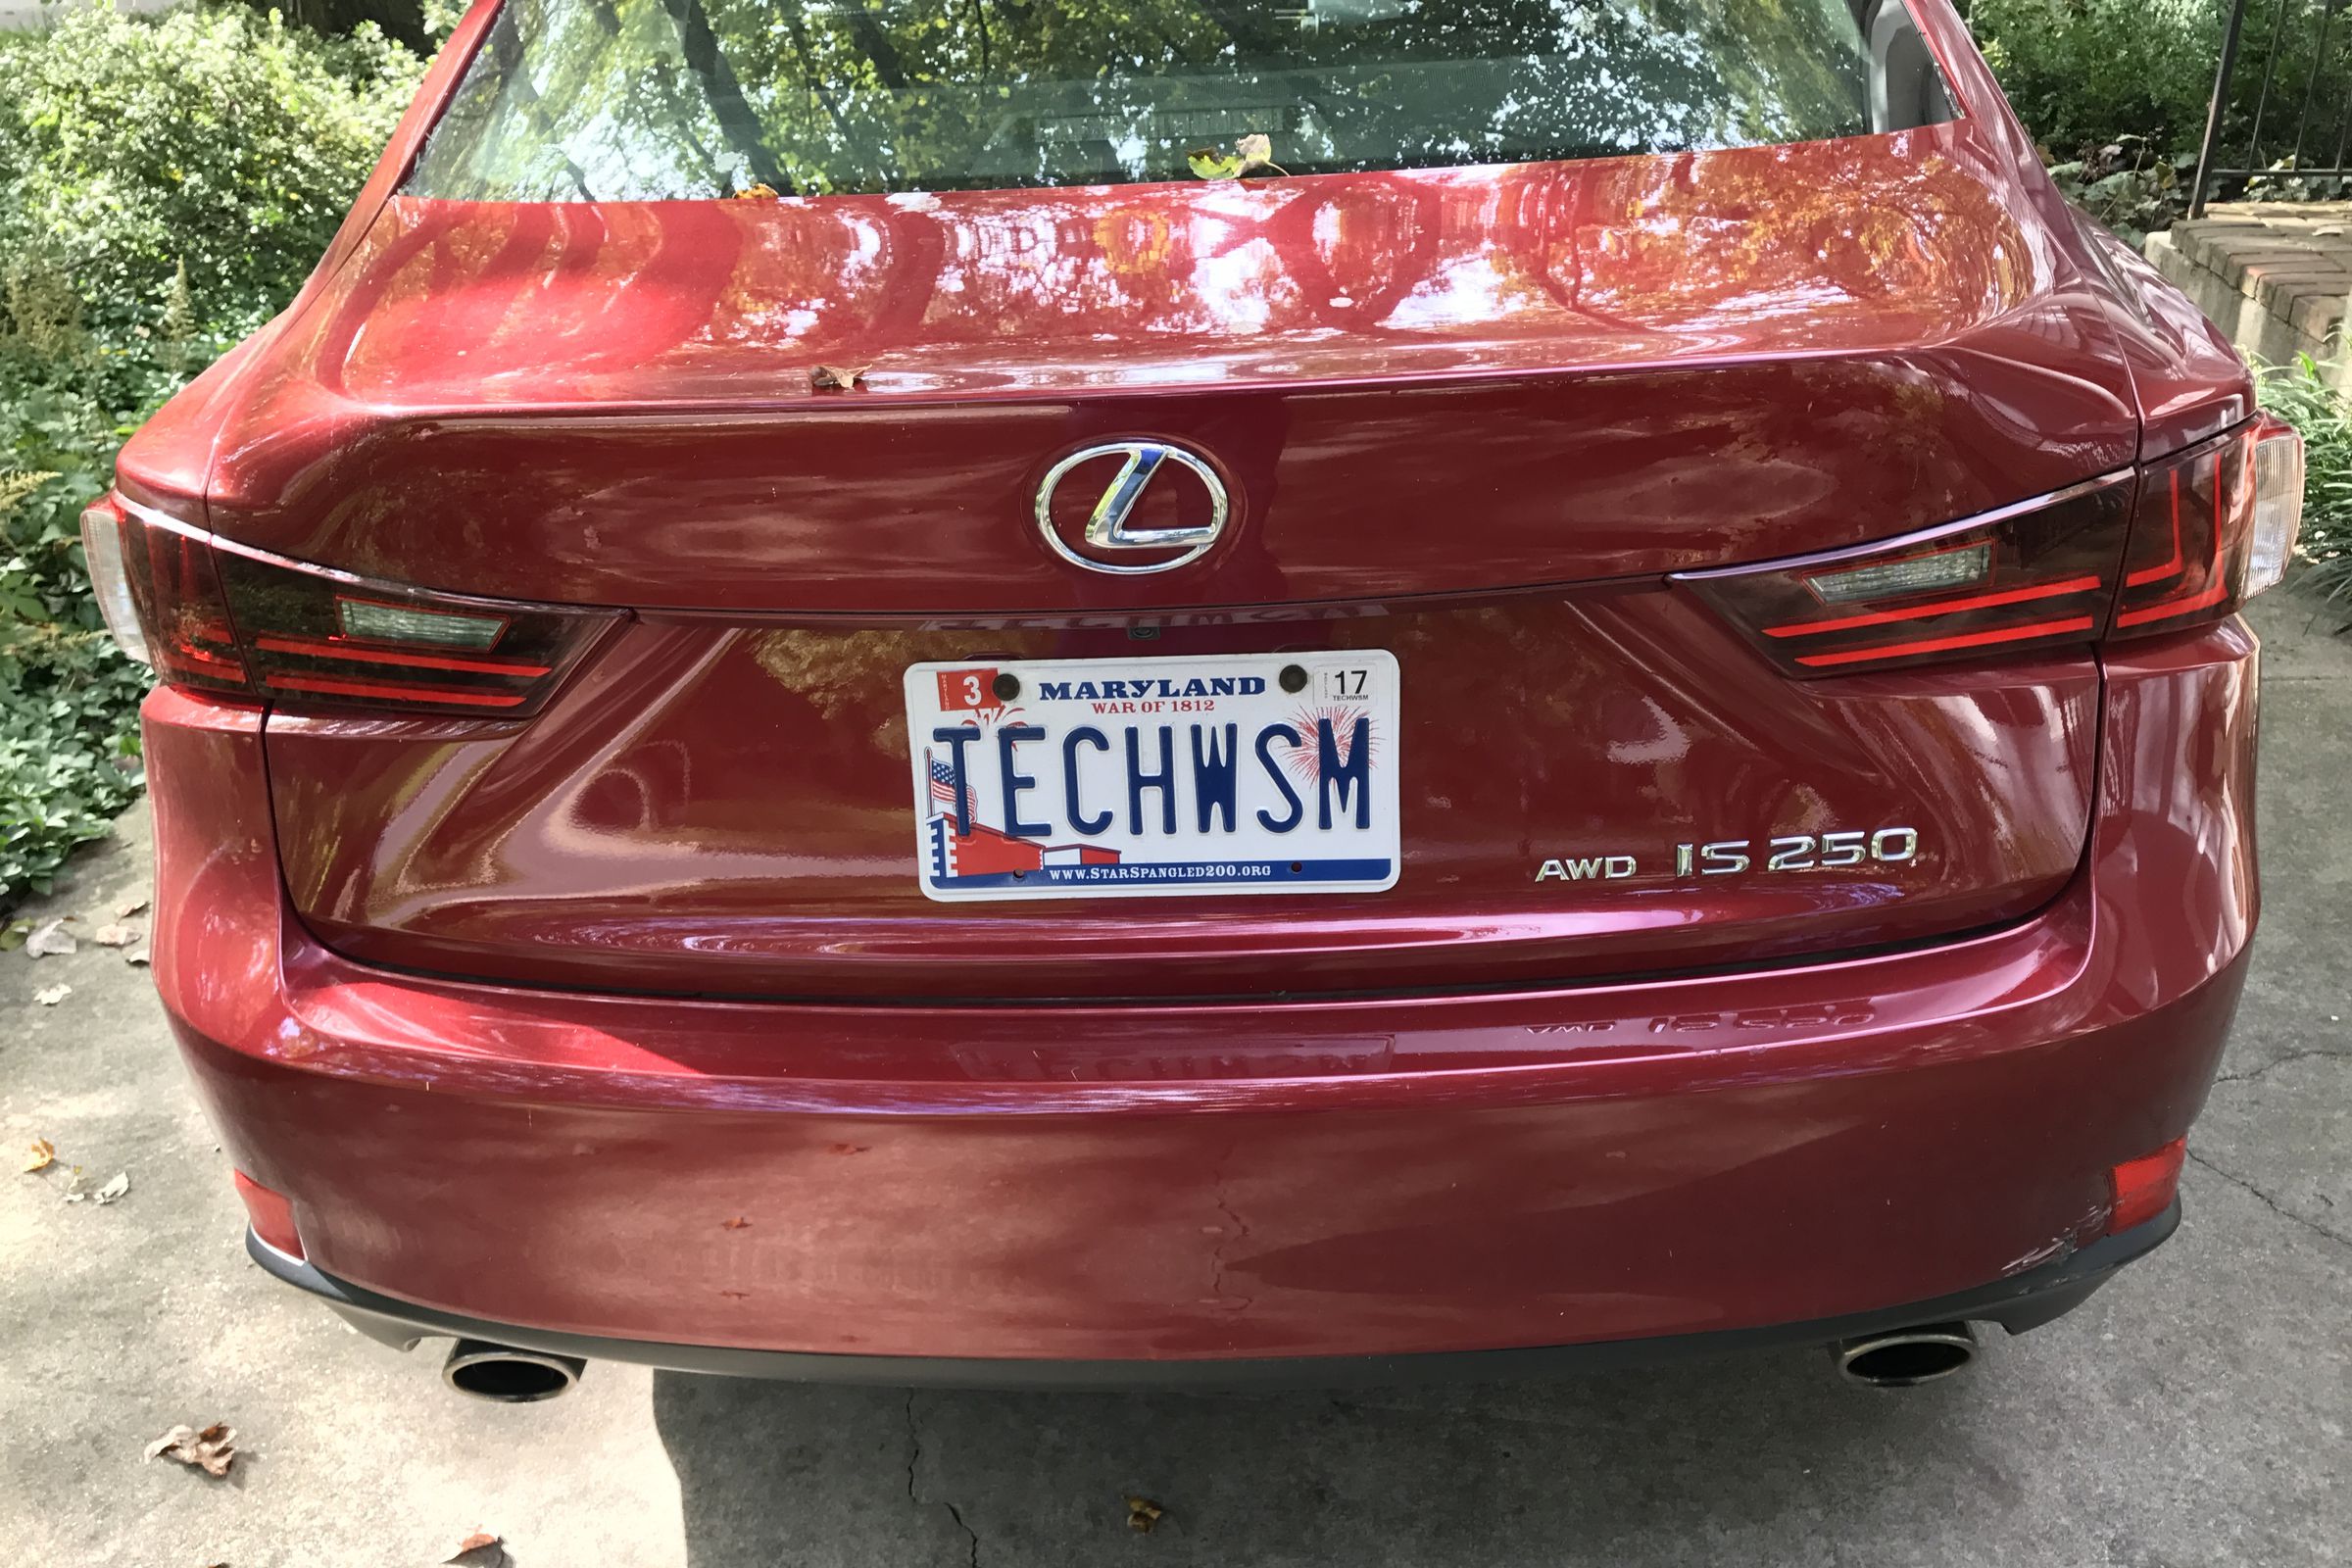 Walt’s red car with TECHWSM license plates